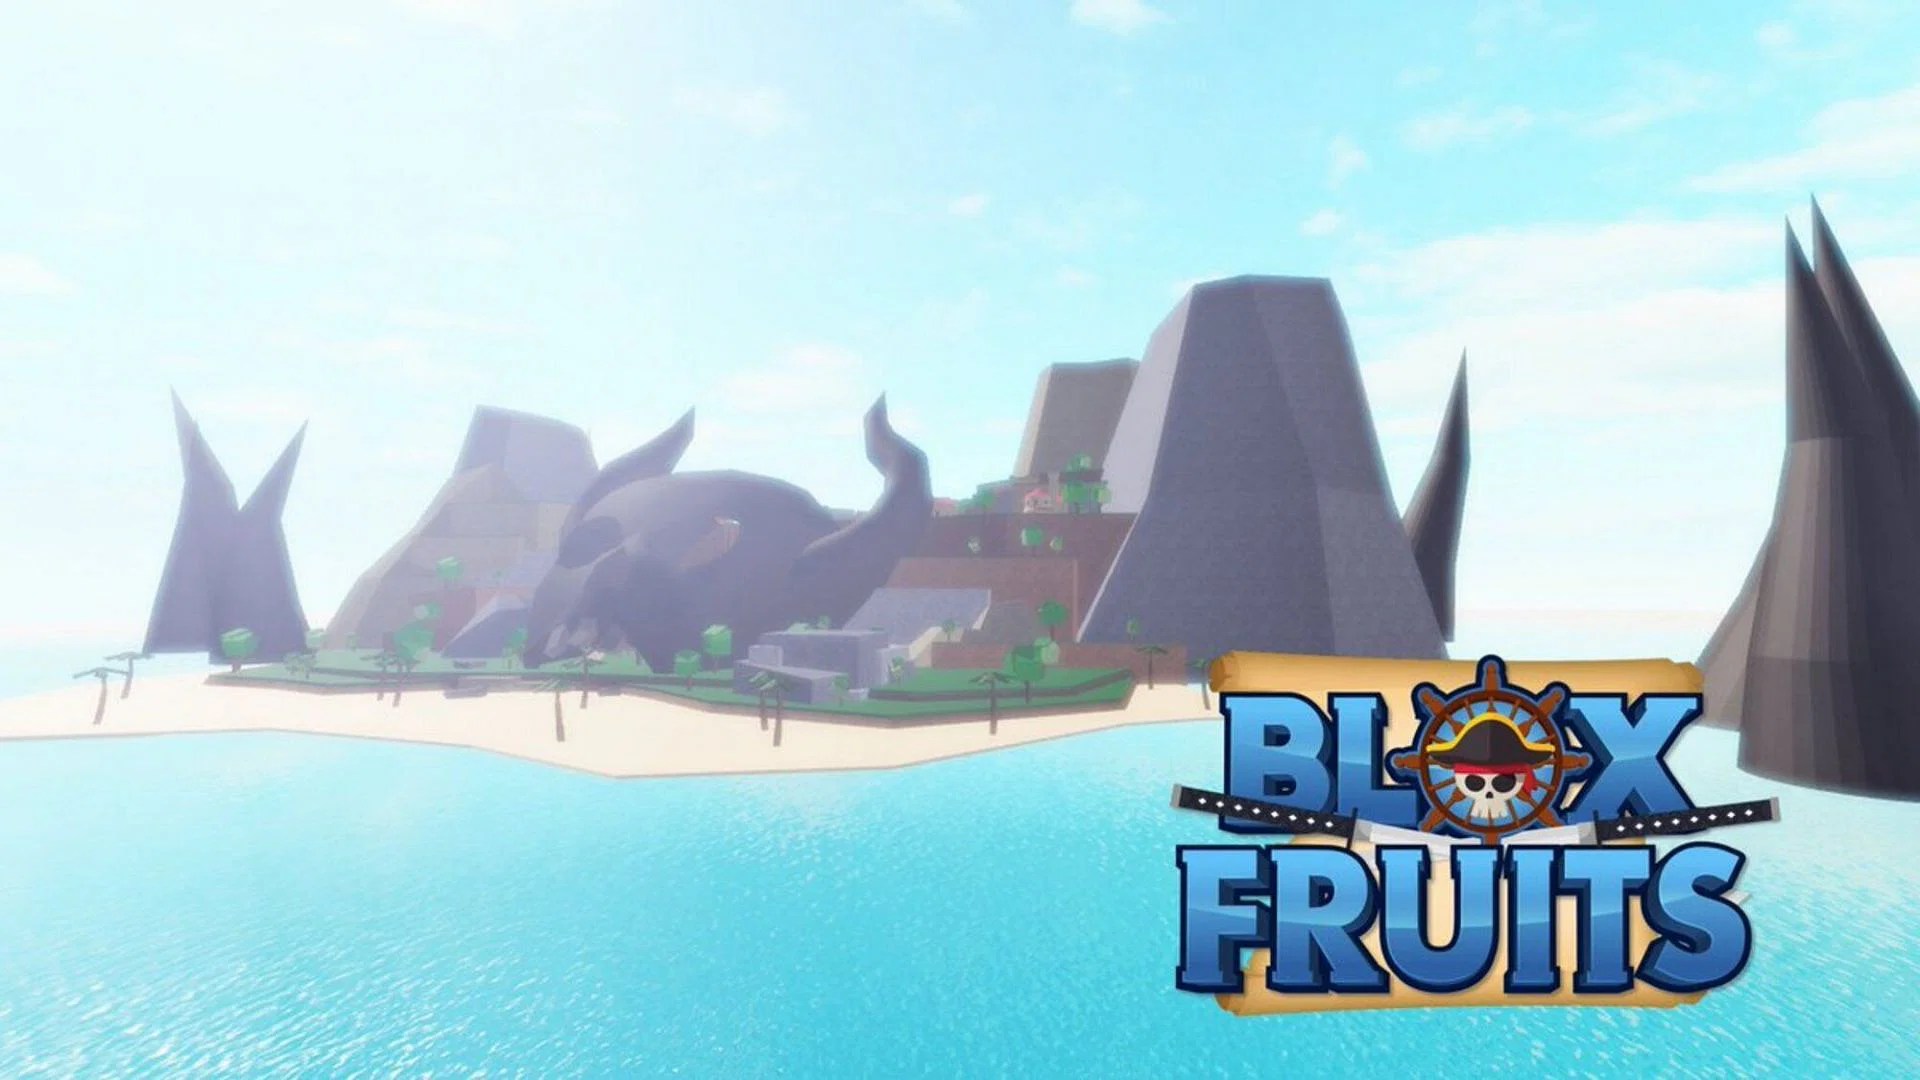 Human V3 In Blox Fruits: Dominating And Rising Human Race - The